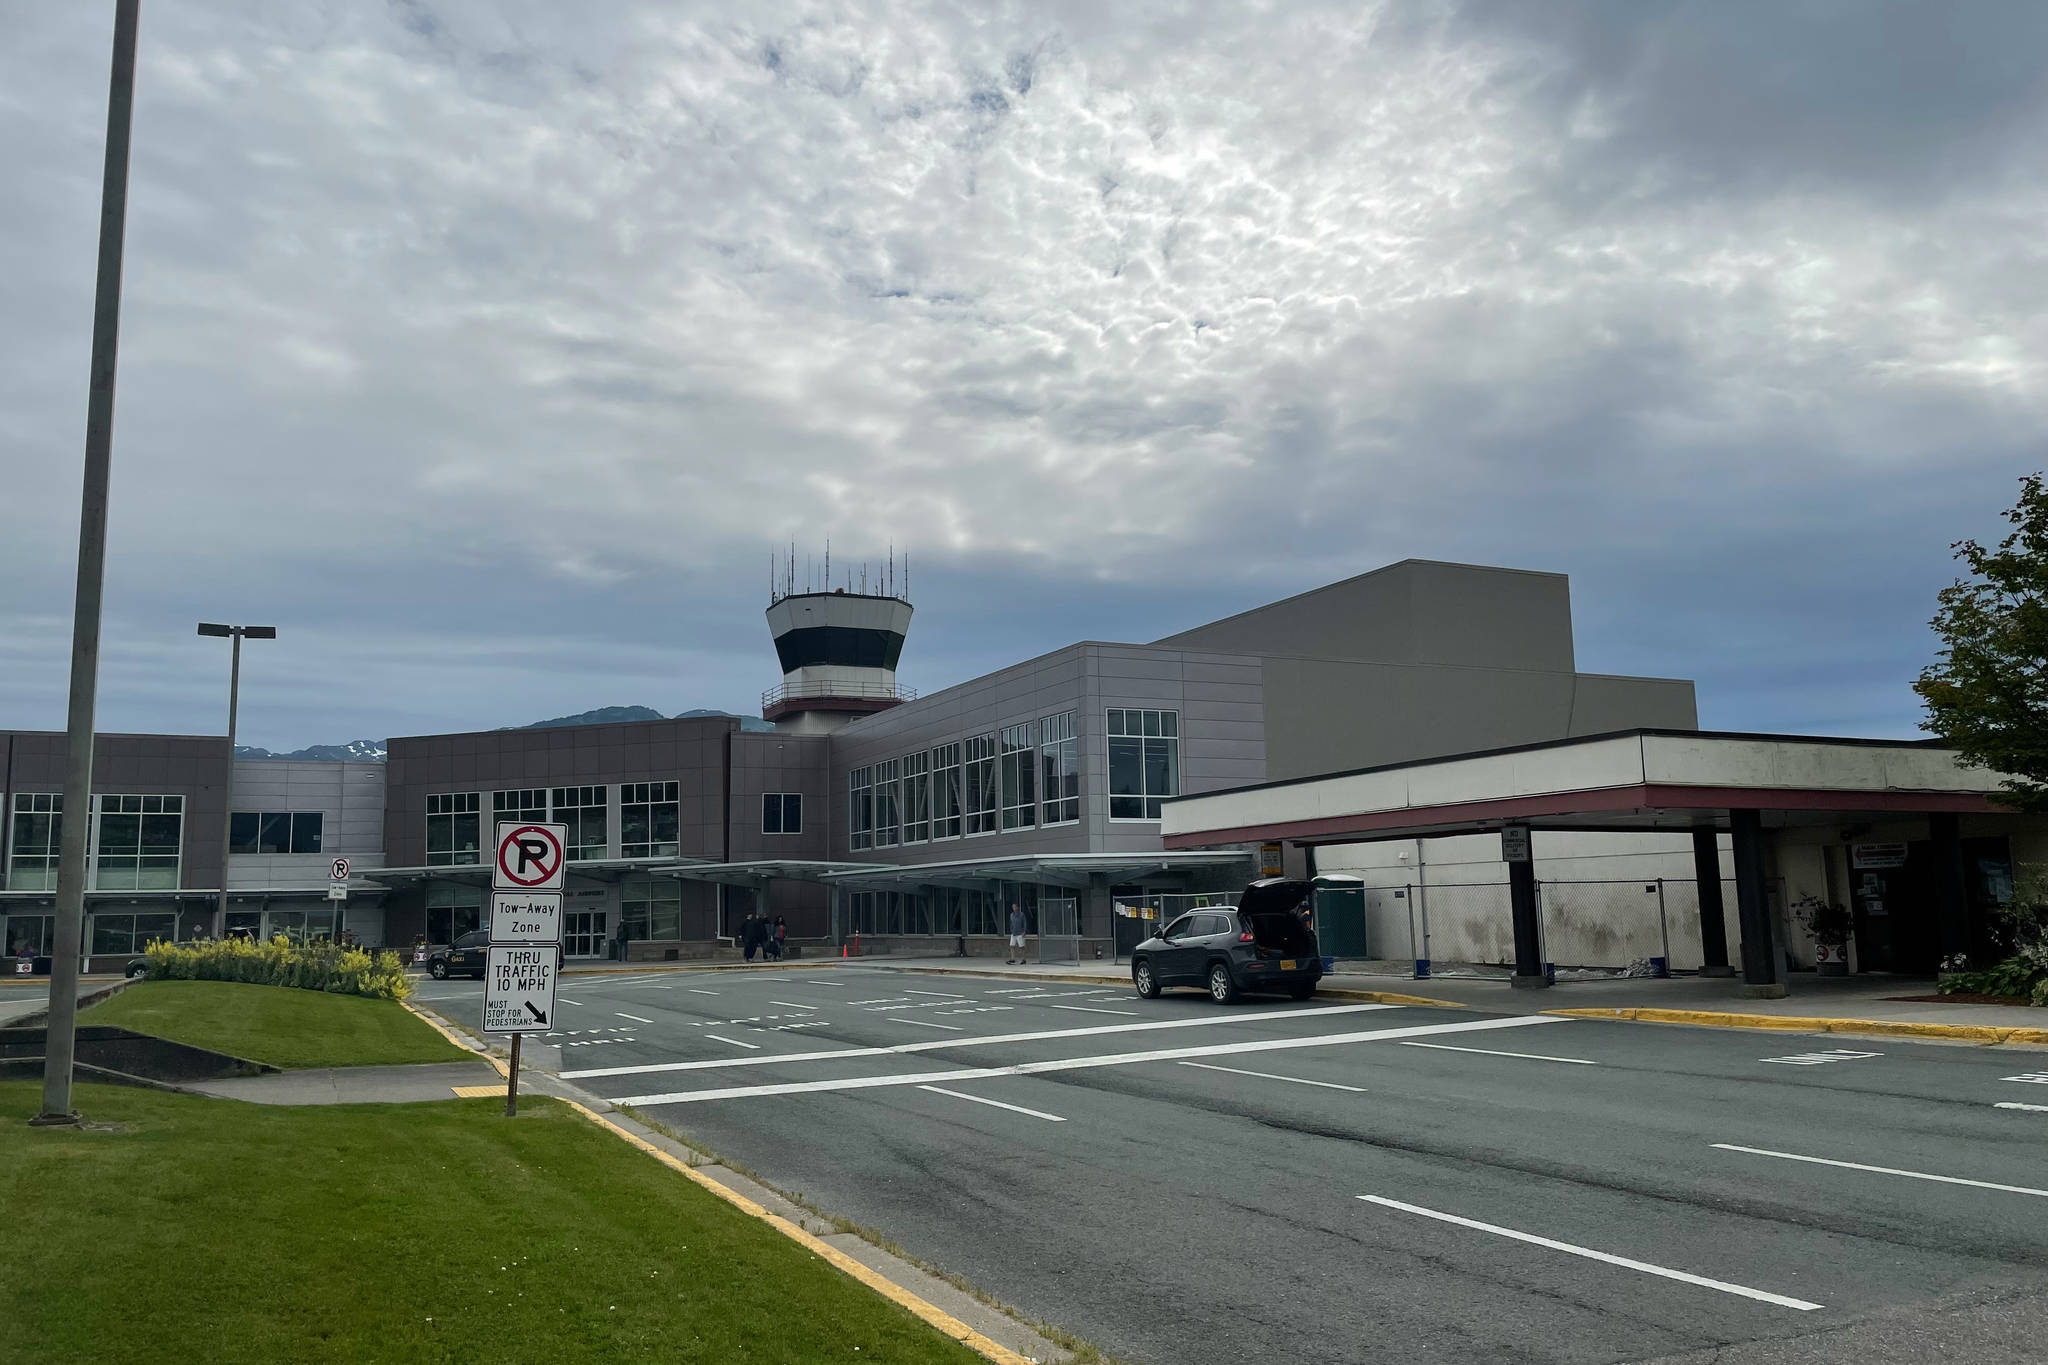 A $27 million renovation of Juneau International Airport, seen here on Aug. 3, 2021, is almost complete, aiming for the end of 2021 or early 2022. (Michael S. Lockett / Juneau Empire)